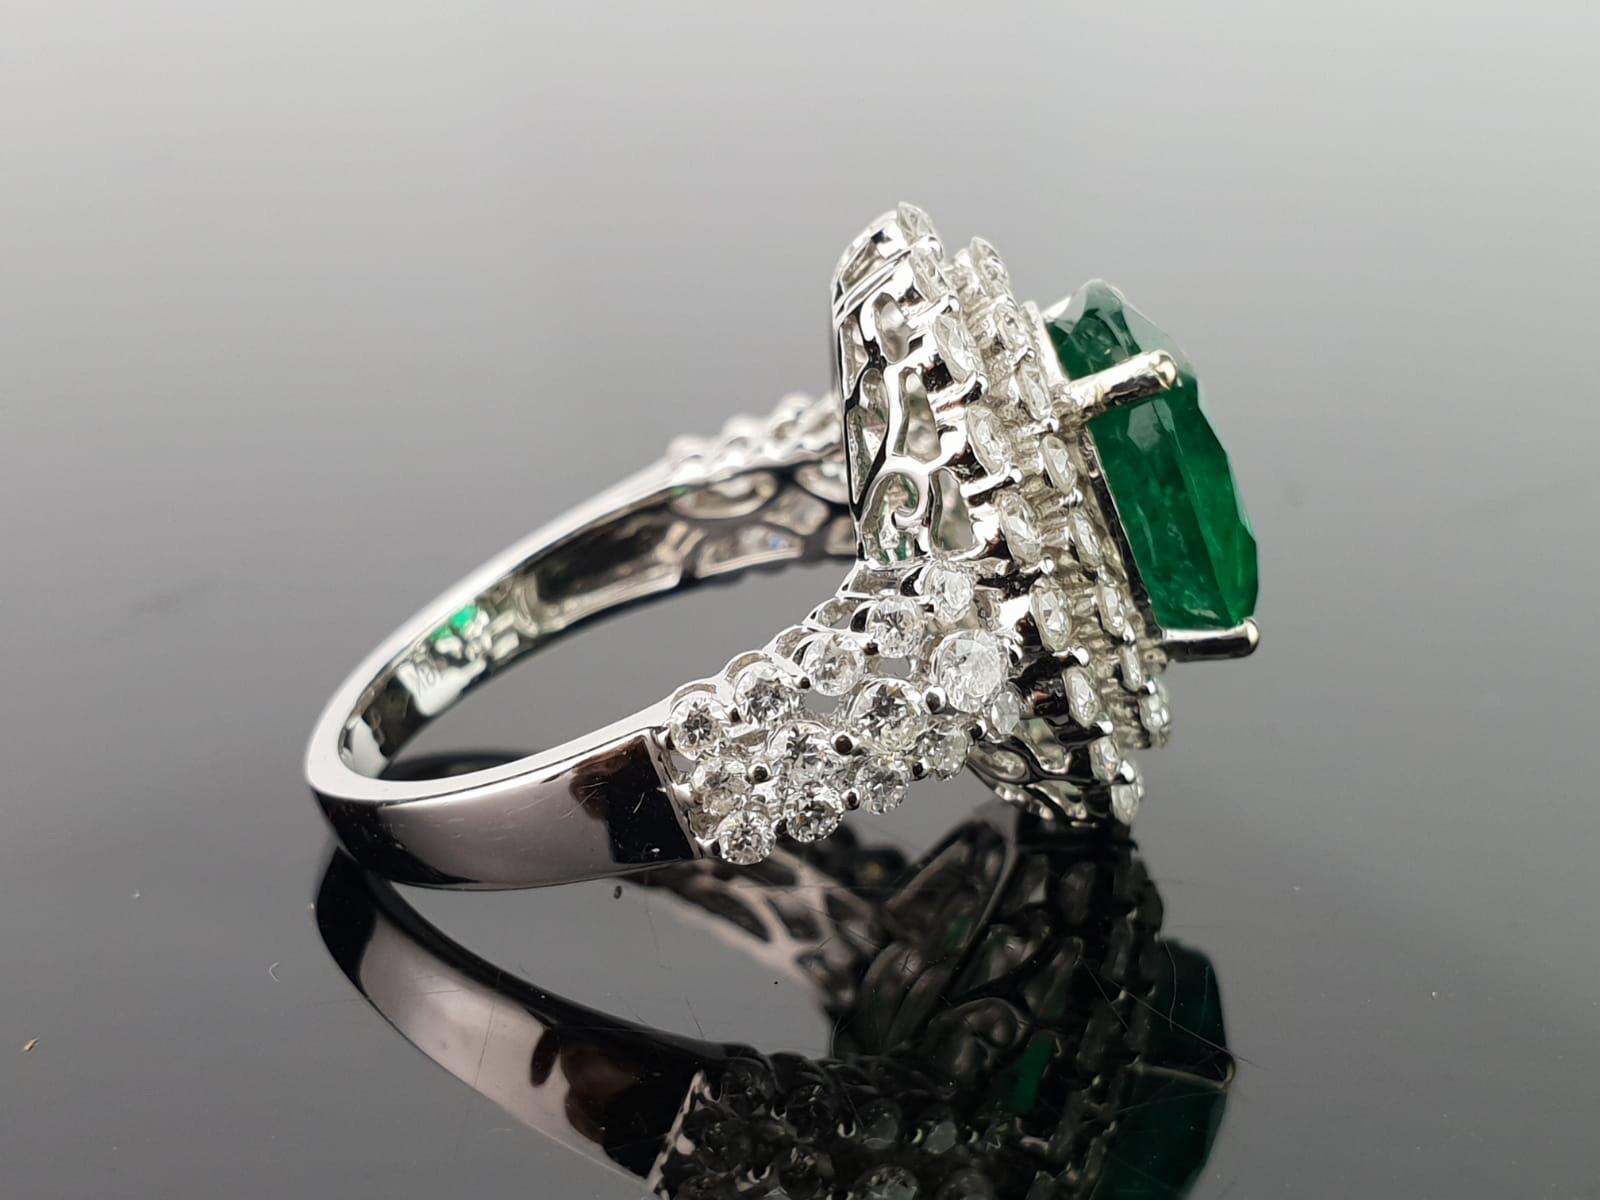 An elegant and simple cocktail ring using a 3.74 carat round cut Zambian Emerald centre stone, with 1.78 carat of brilliant cut diamonds sorrounding it, all set in 18K white and gold. Currently a ring size US 6, but we can resize the ring for you